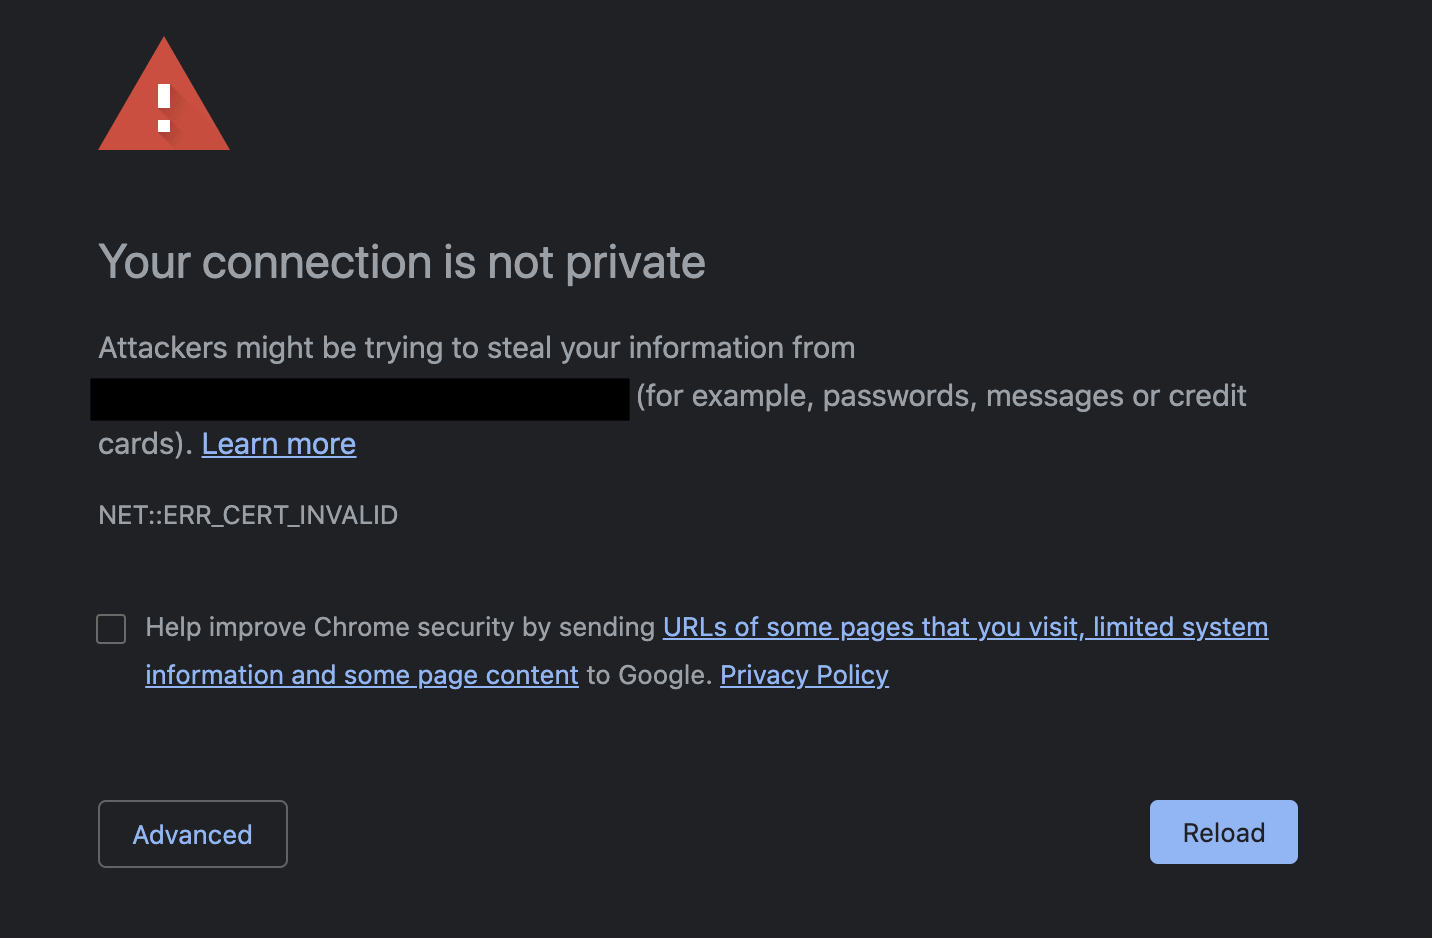 MacOS Chrome connection is not private